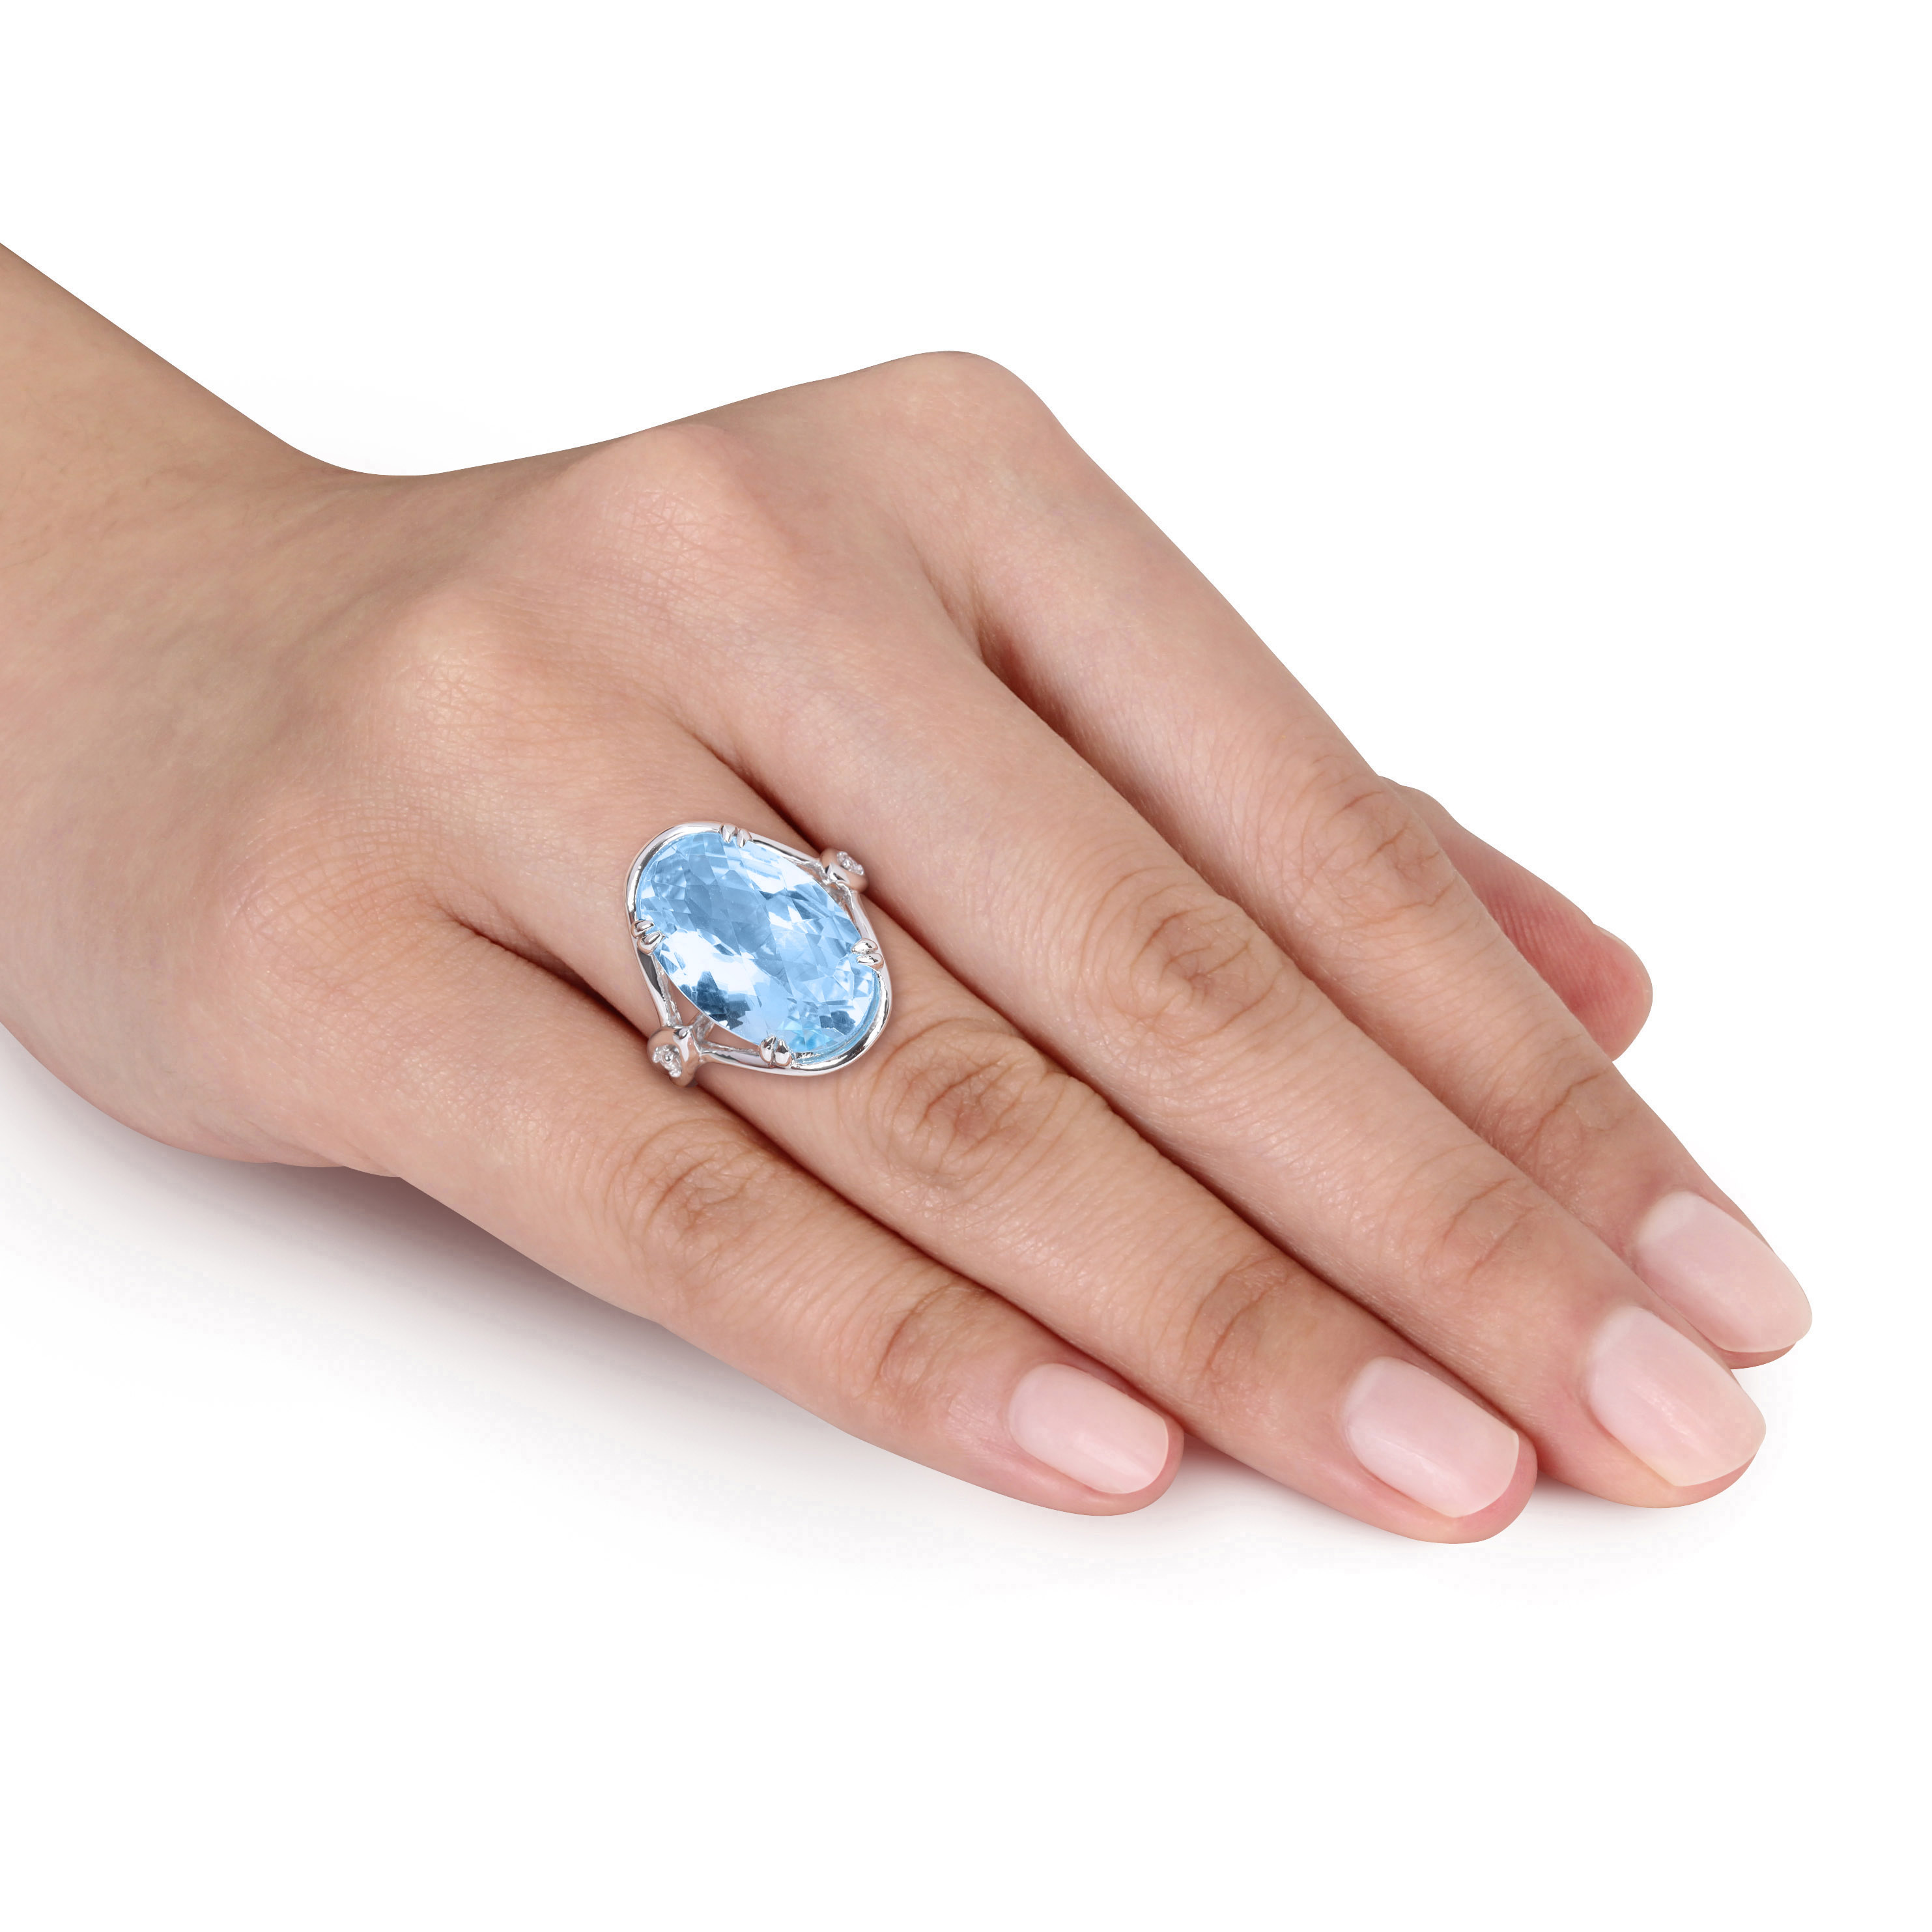 13 3/5 CT TGW Oval Checkerboard-Cut Sky Blue Topaz and White Topaz Solitaire Ring in Sterling Silver